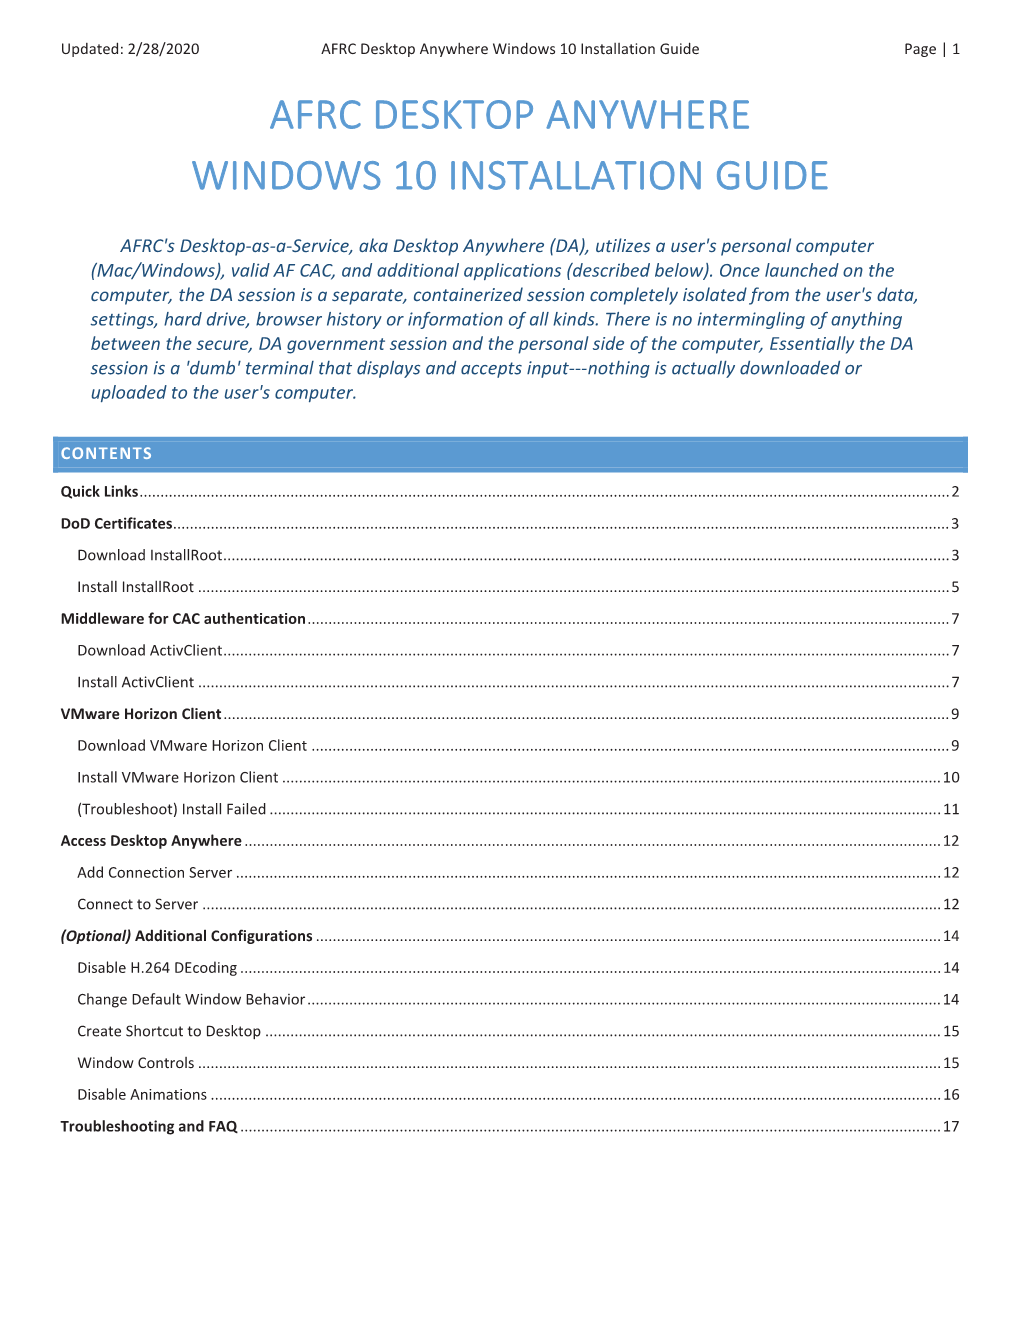 AFRC Desktop Anywhere Windows 10 Installation Guide Page | 1